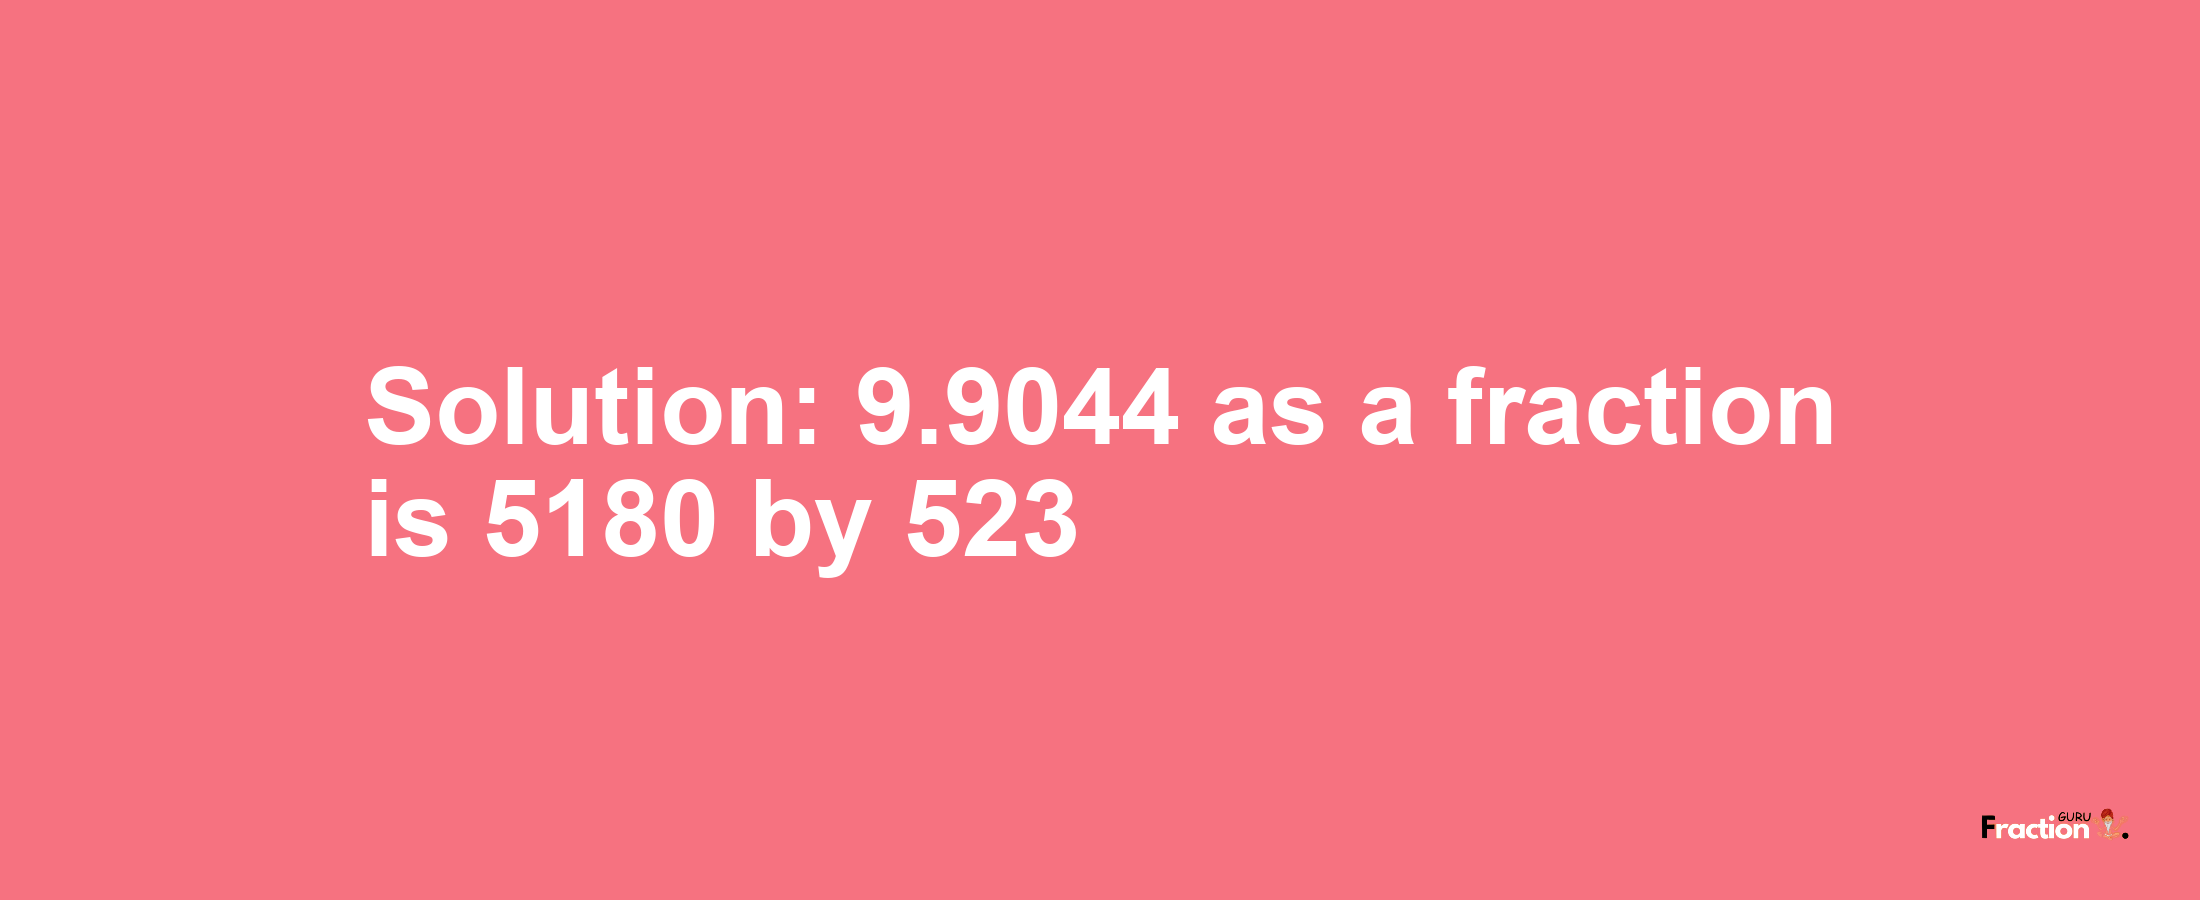 Solution:9.9044 as a fraction is 5180/523